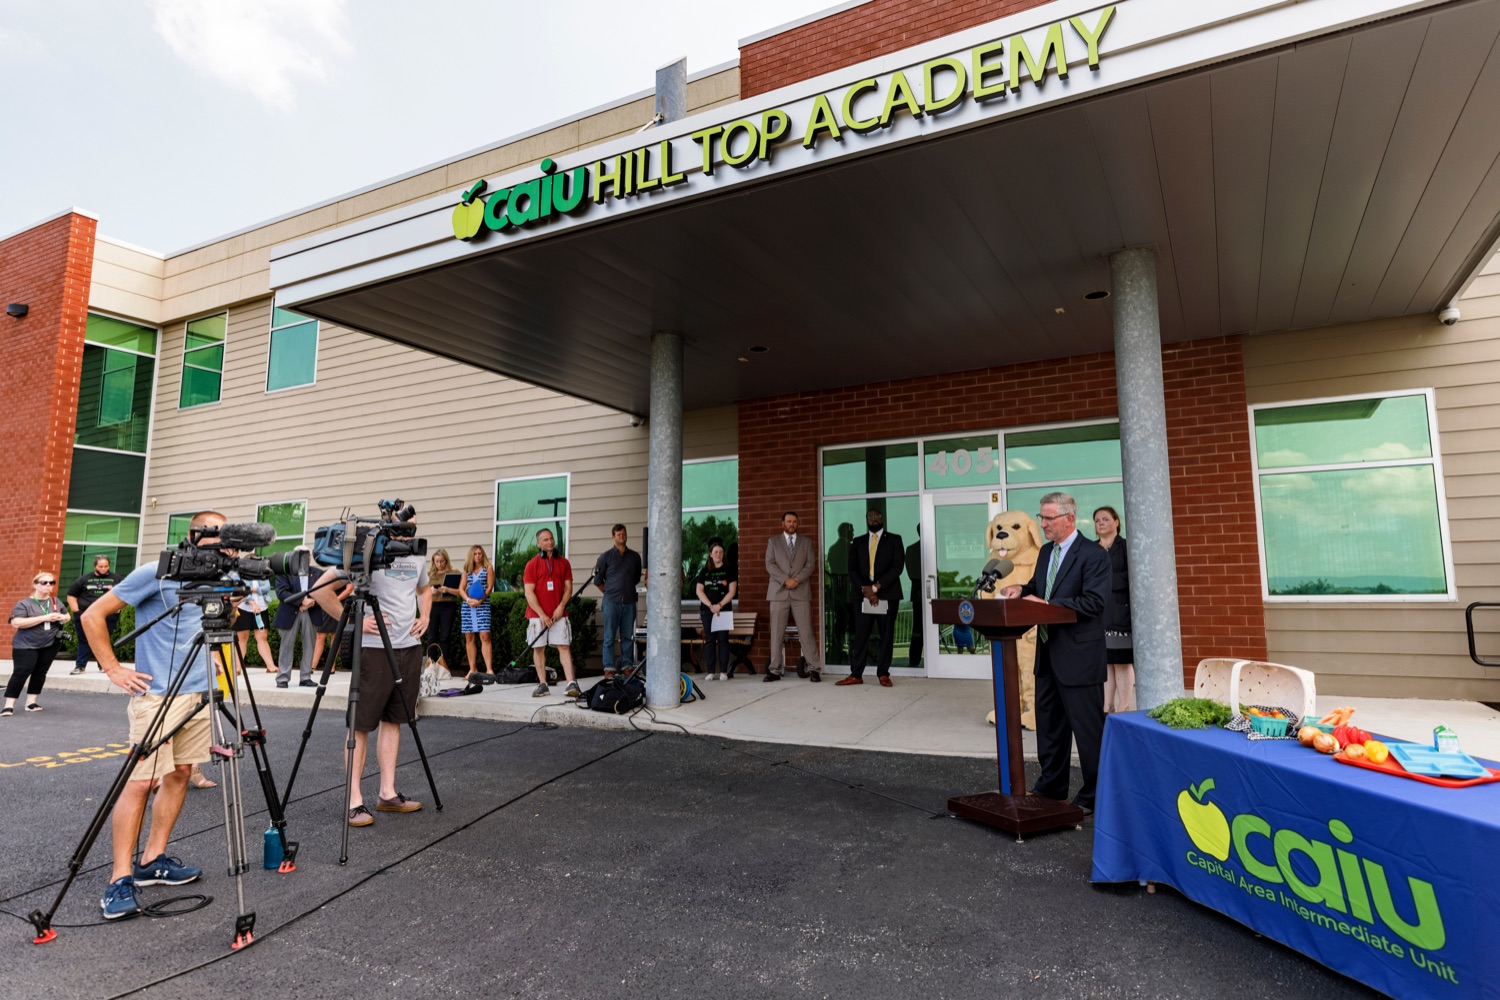 PA Dept. of Agriculture Secretary Russell Redding speaks during a press conference, which highlighted the success of Pennsylvania's farm to school programs, at Hill Top Academy in Mechanicsburg on Friday, August 27, 2021.<br><a href="https://filesource.amperwave.net/commonwealthofpa/photo/19054_AGRIC_FarmToSchool_NK_002.jpg" target="_blank">⇣ Download Photo</a>